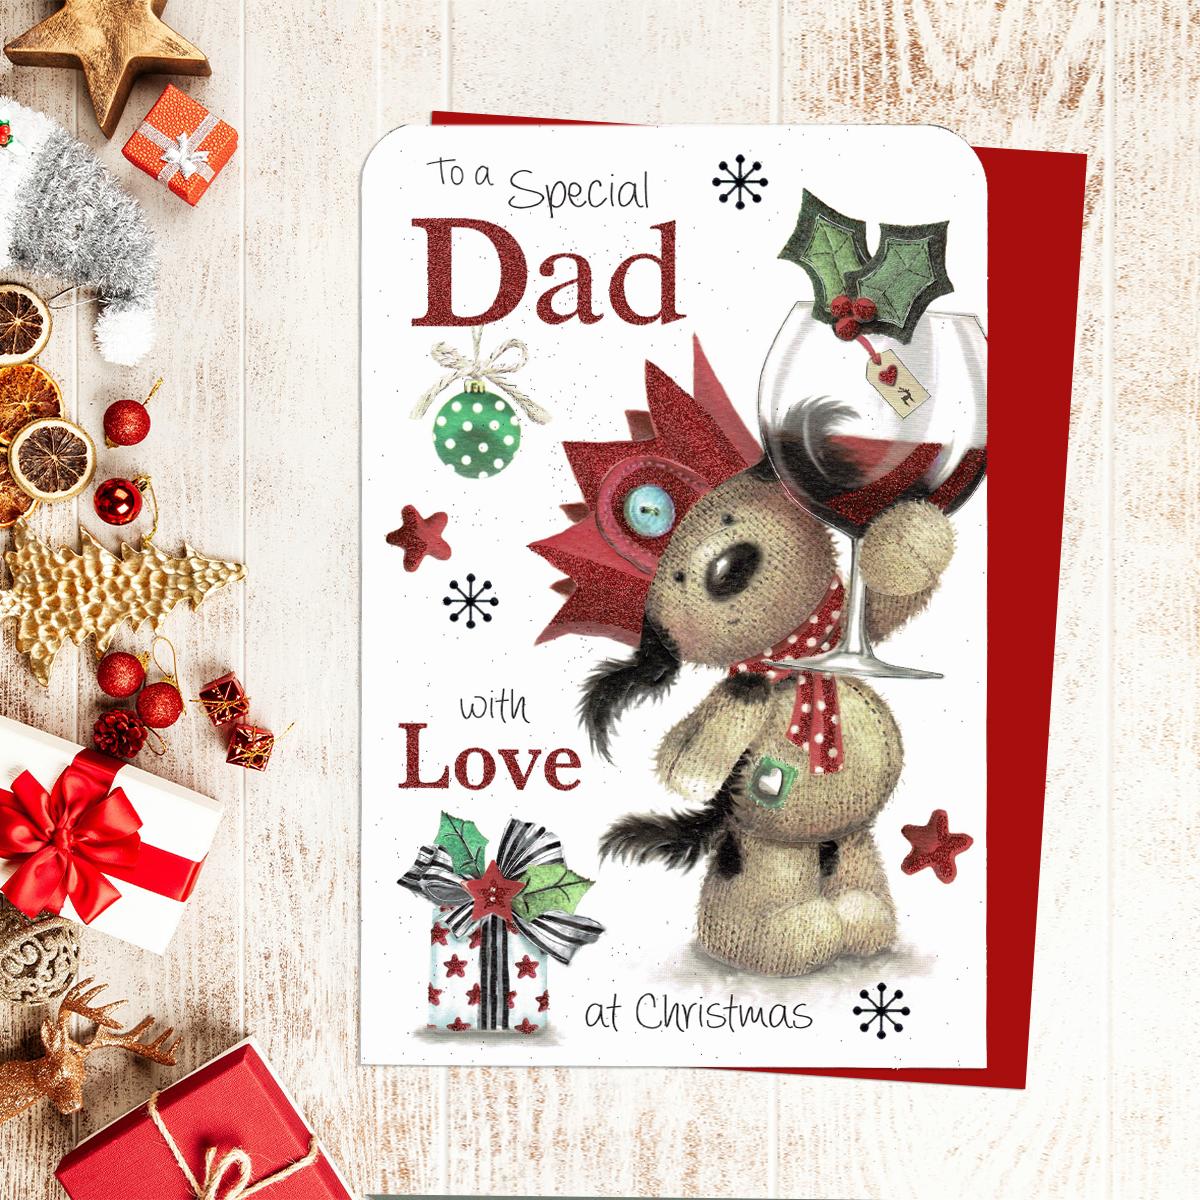 To A Special Dad With Love At Christmas Showing A Dog With A Large Glass Of Red Wine. Enhanced With Red Glitter and Finished with A Red Envelope